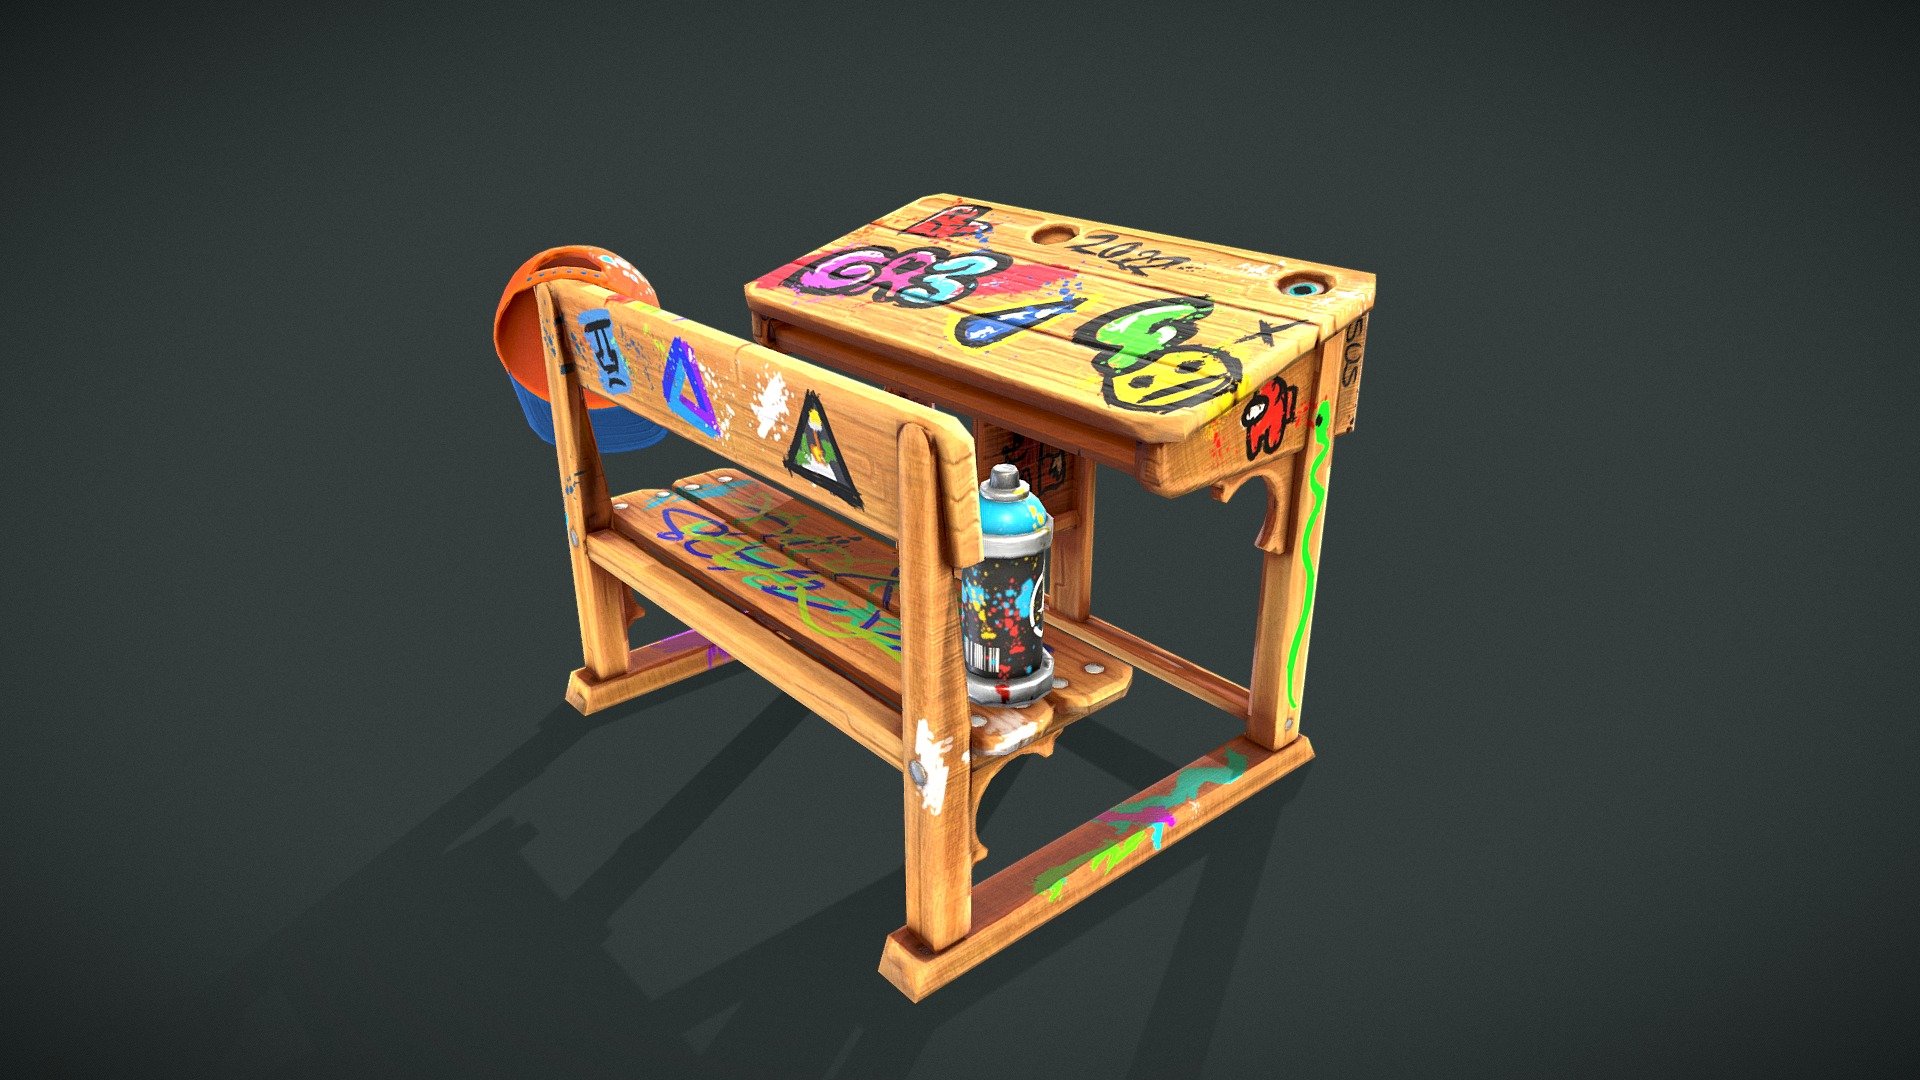 A stylized desk I had to do for a school assignment. This one got tagged by a bad boy! - Tagged school desk - 3D model by Etienne Sachot (@Berzing) 3d model